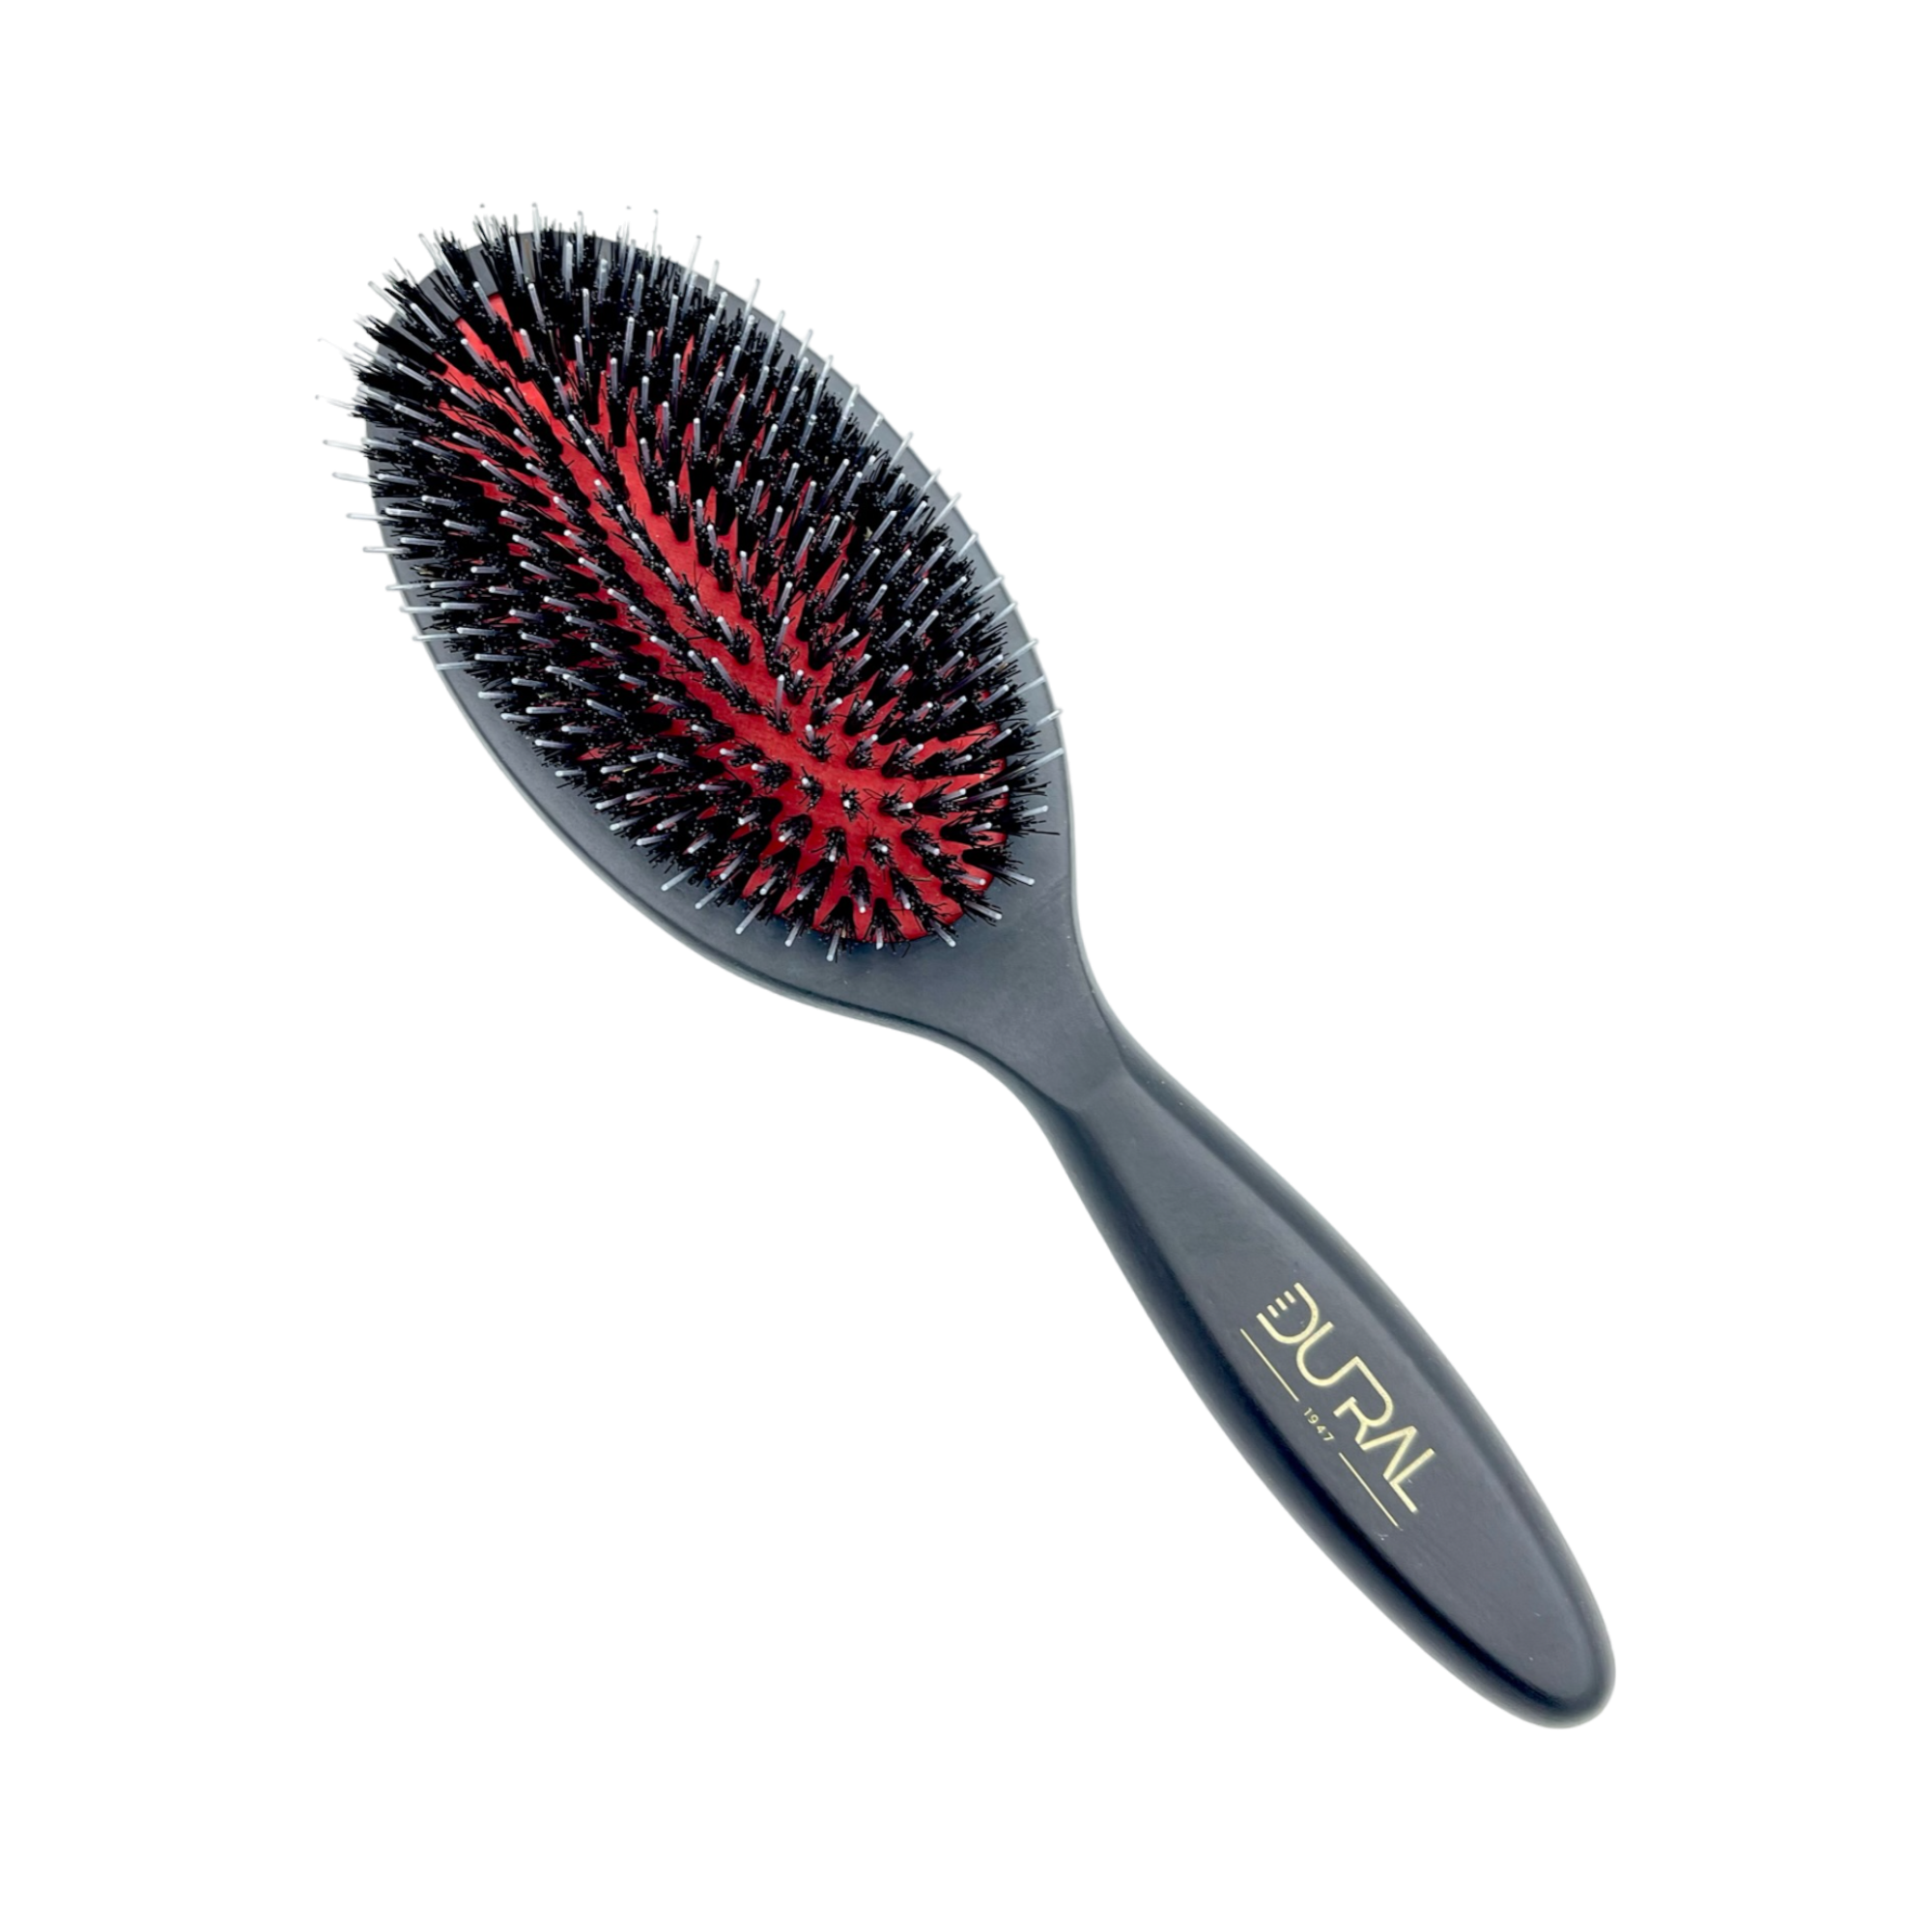 Dural Beech wood rubber cushion hair brush with boar bristles and nylon